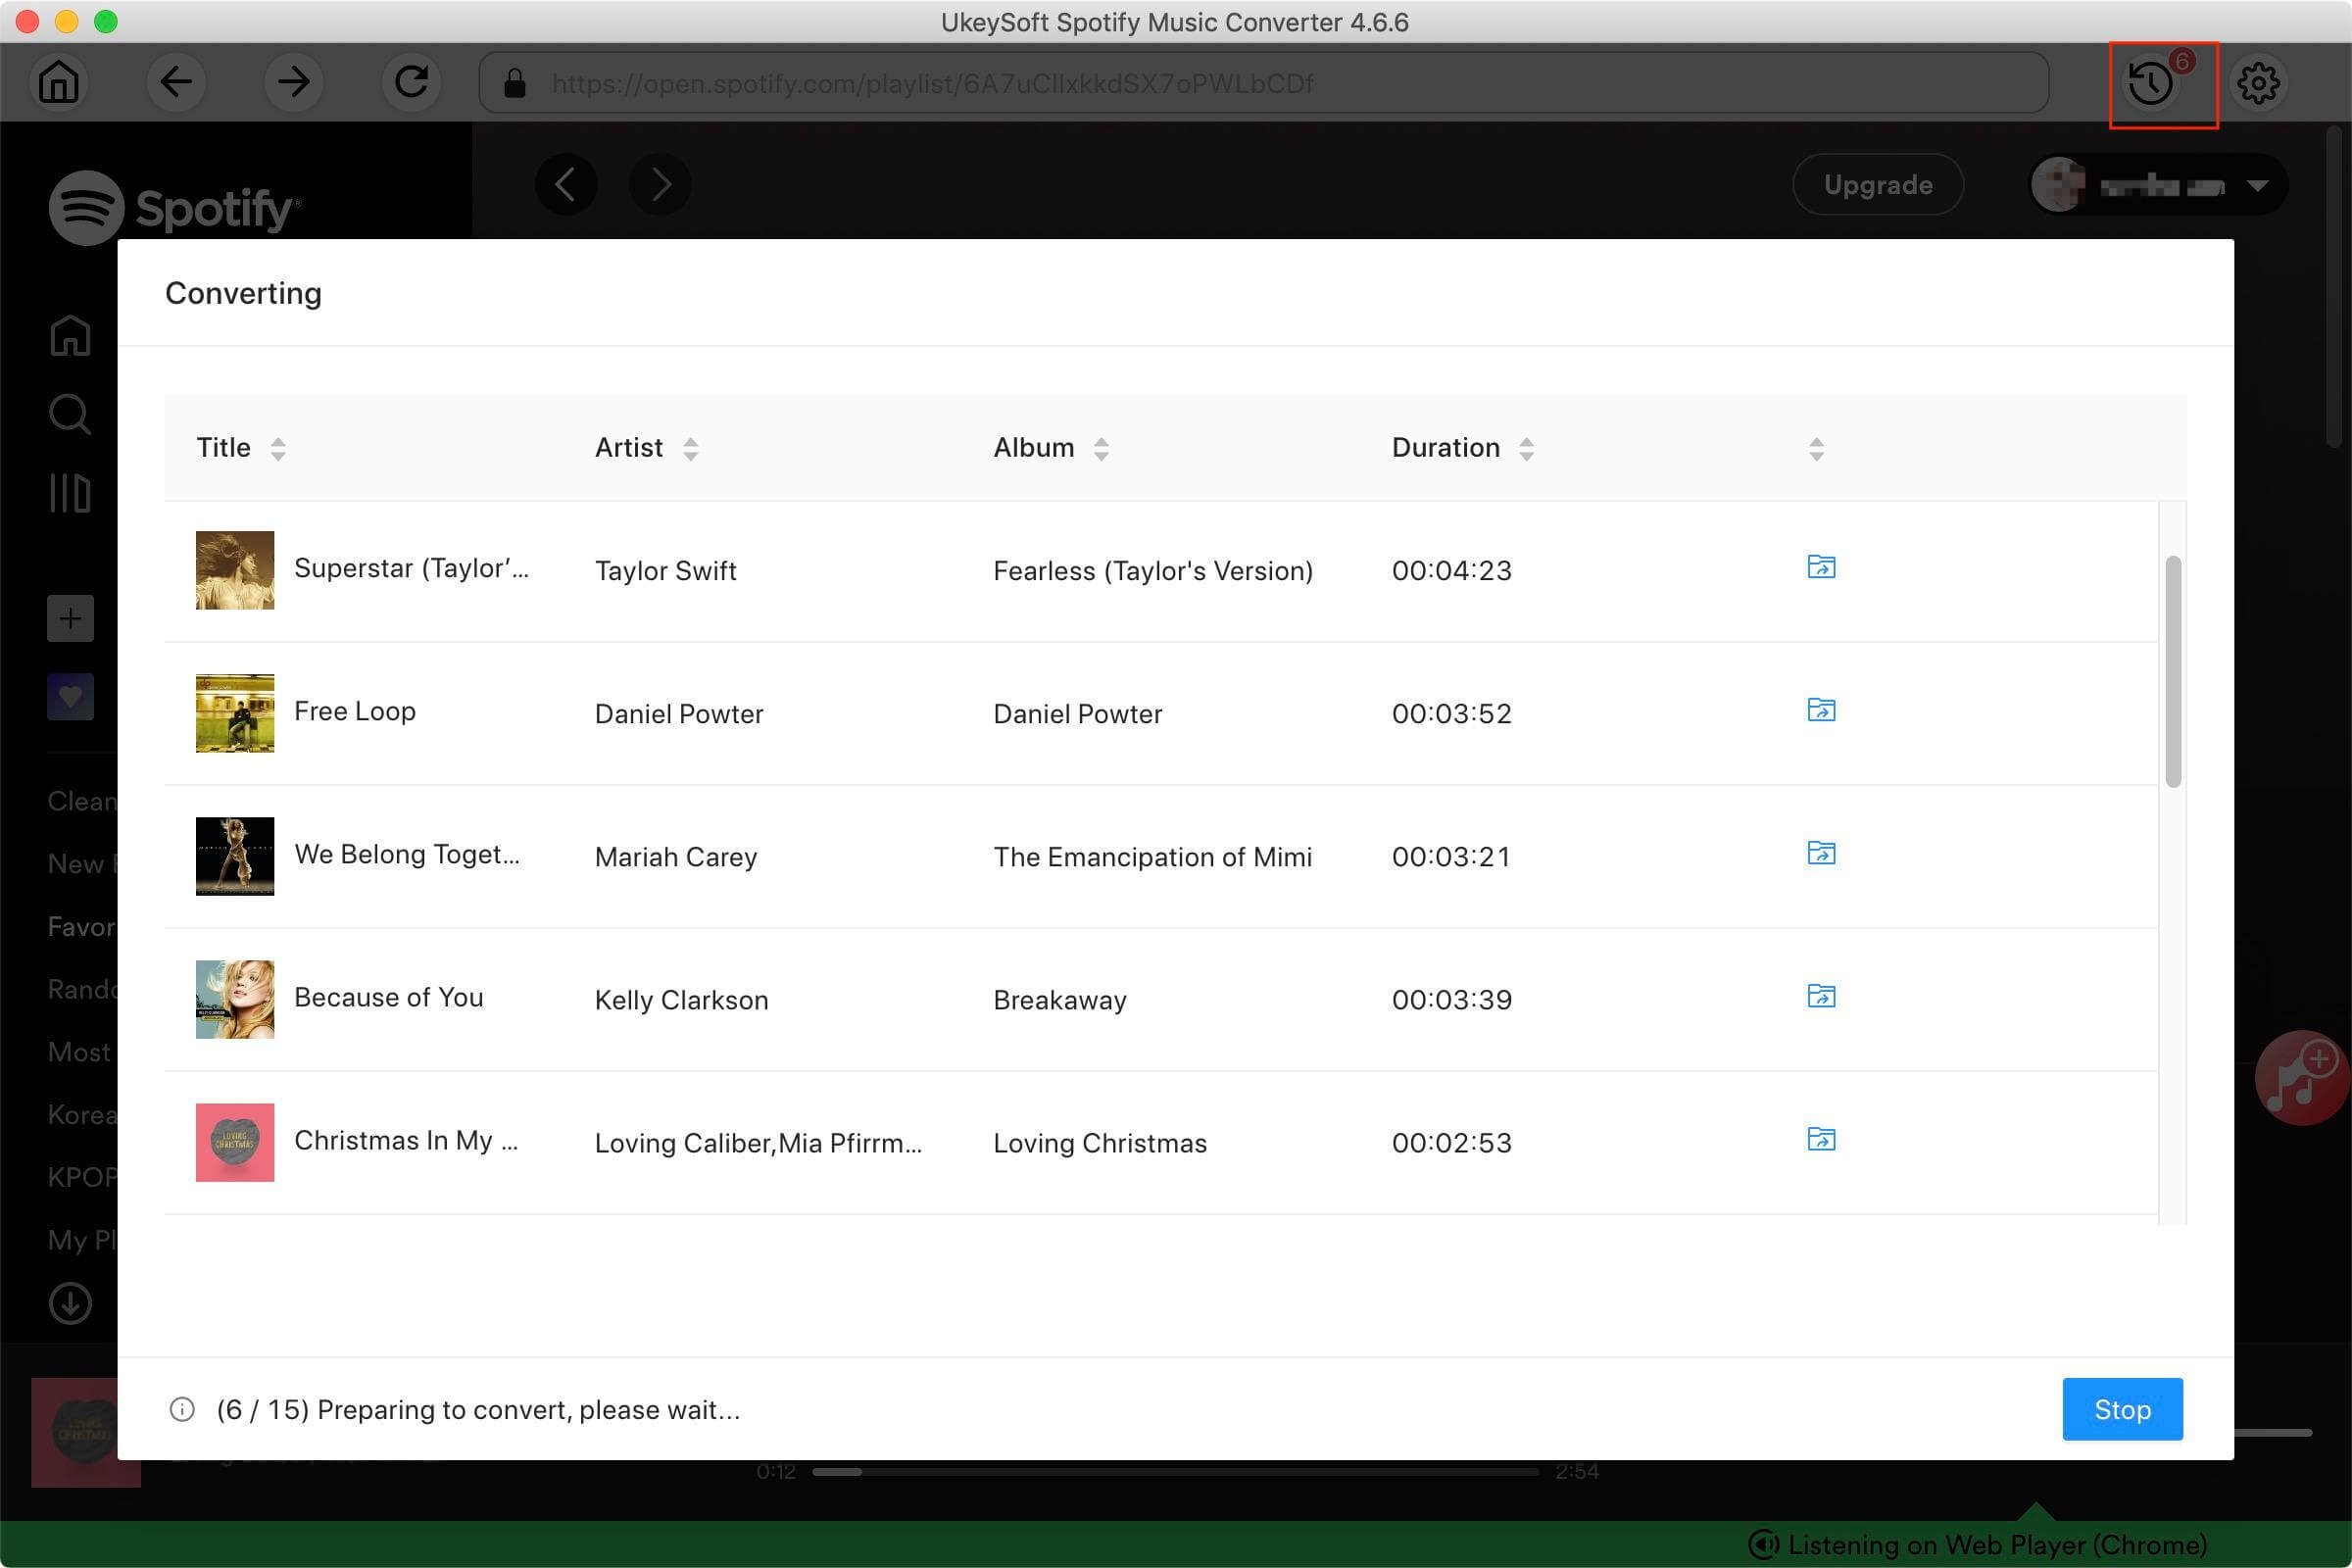 get spotify music in MP3 format